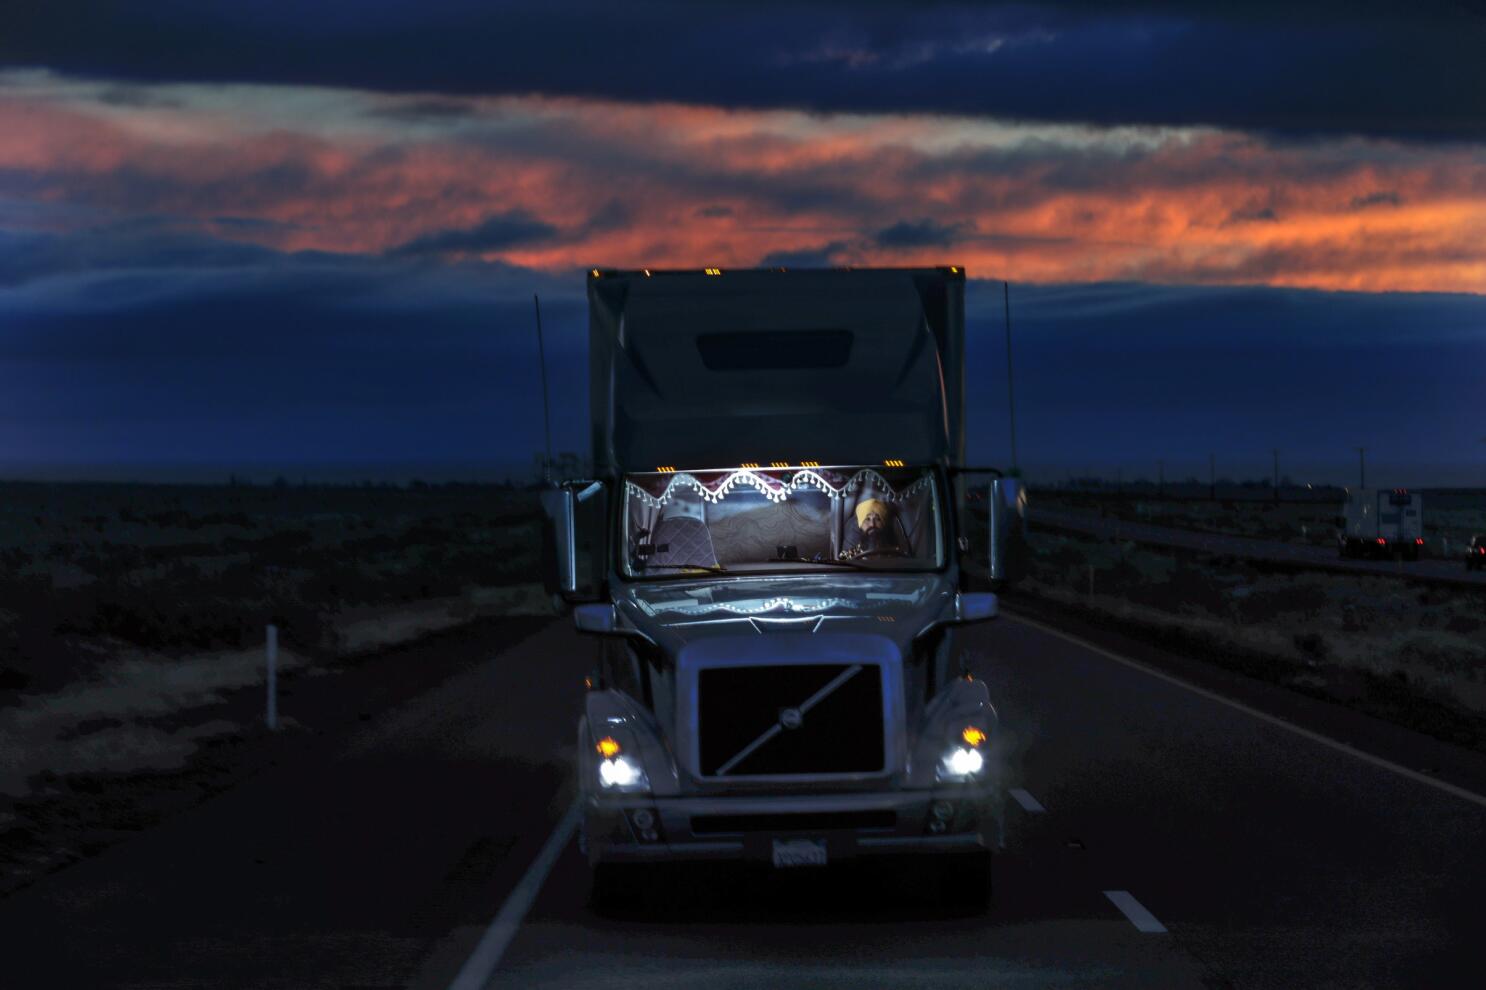 Truck drivers are essential workers. We need to treat them that way